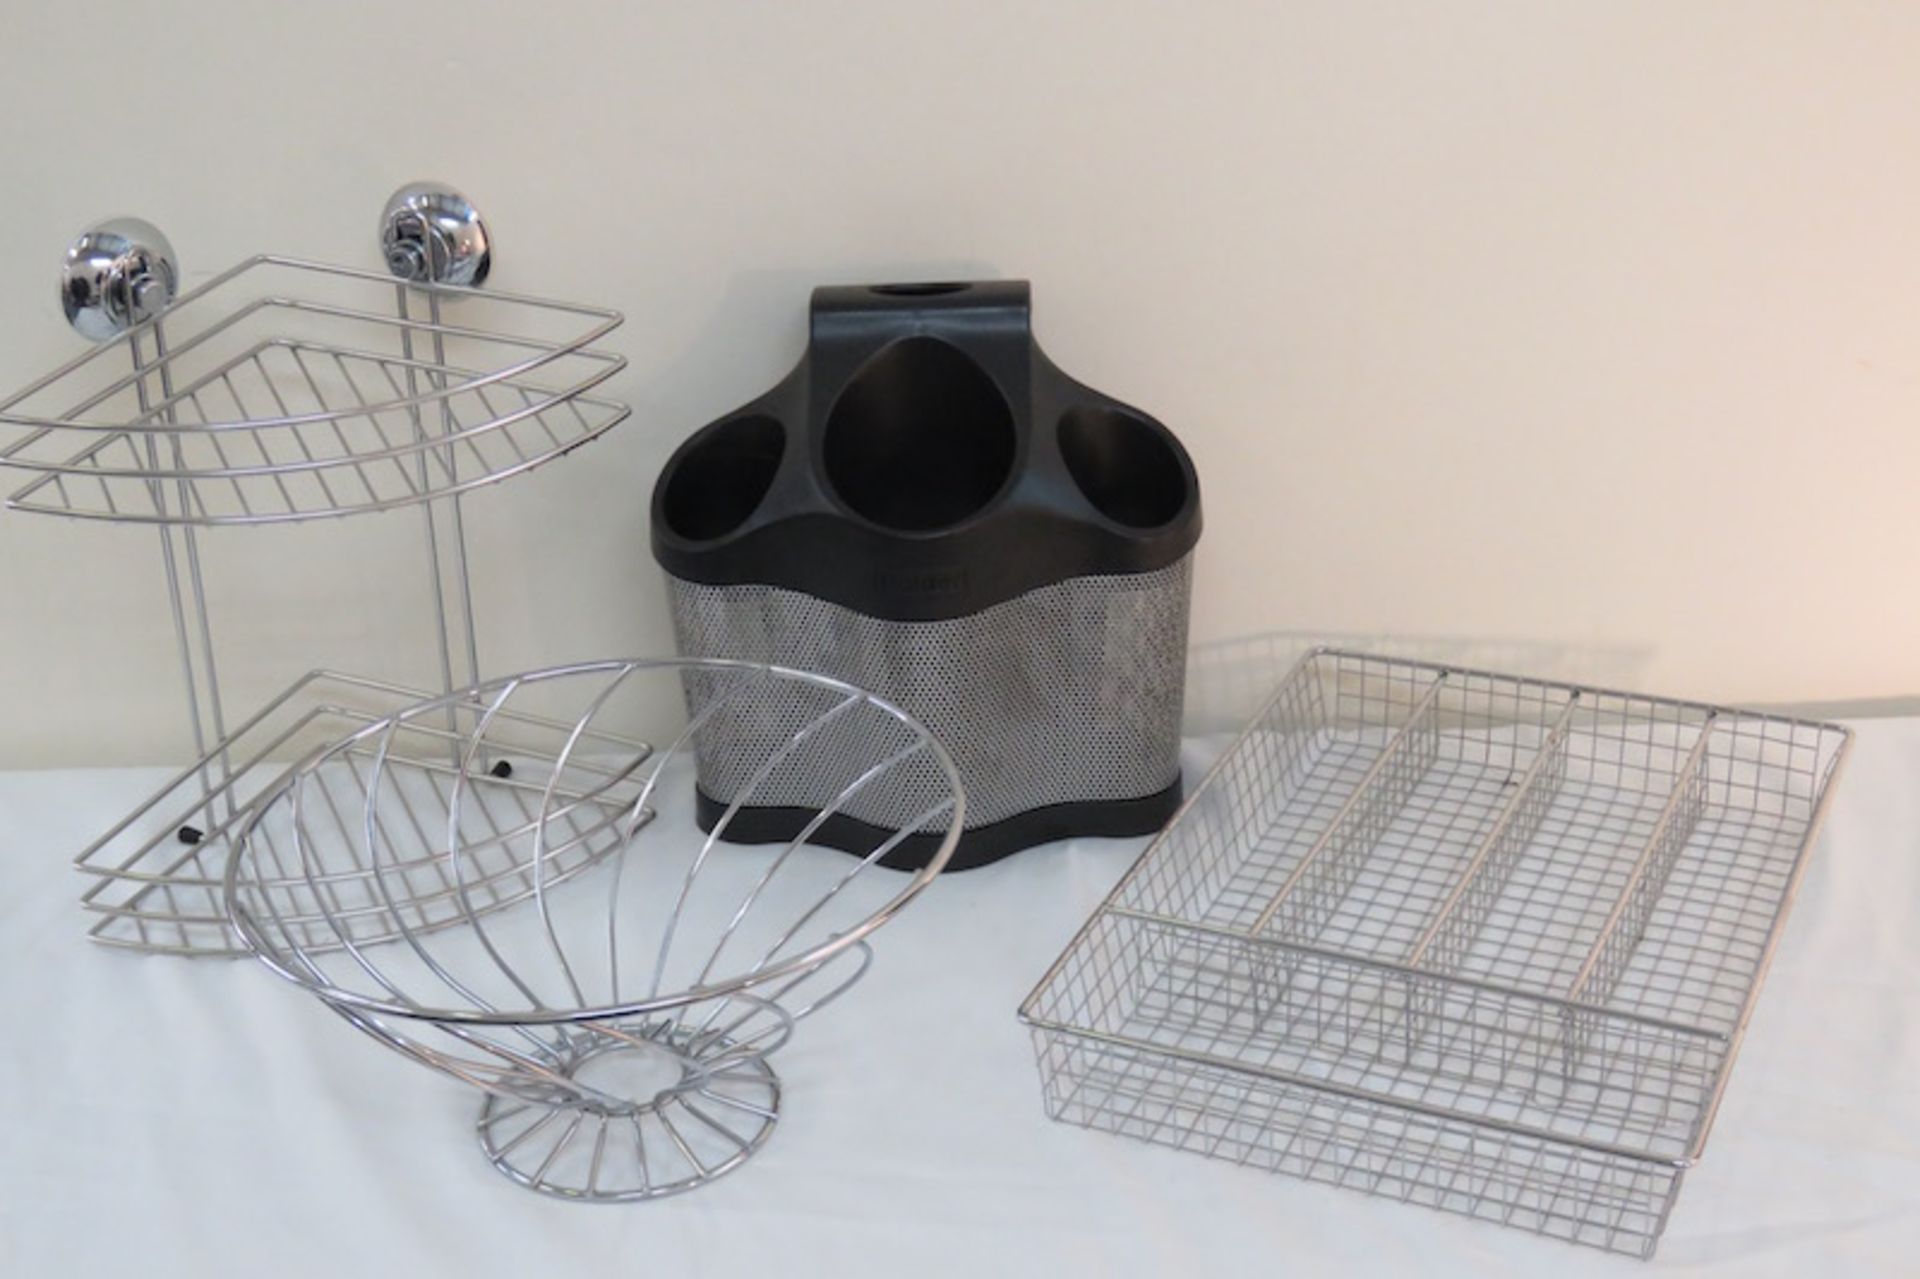 4 X ITEMS: POLDER HAIRDRYER HOLDER IN BLACK, SHOWER BASKET, CUTLERY TRAY AND FRUIT BOWL